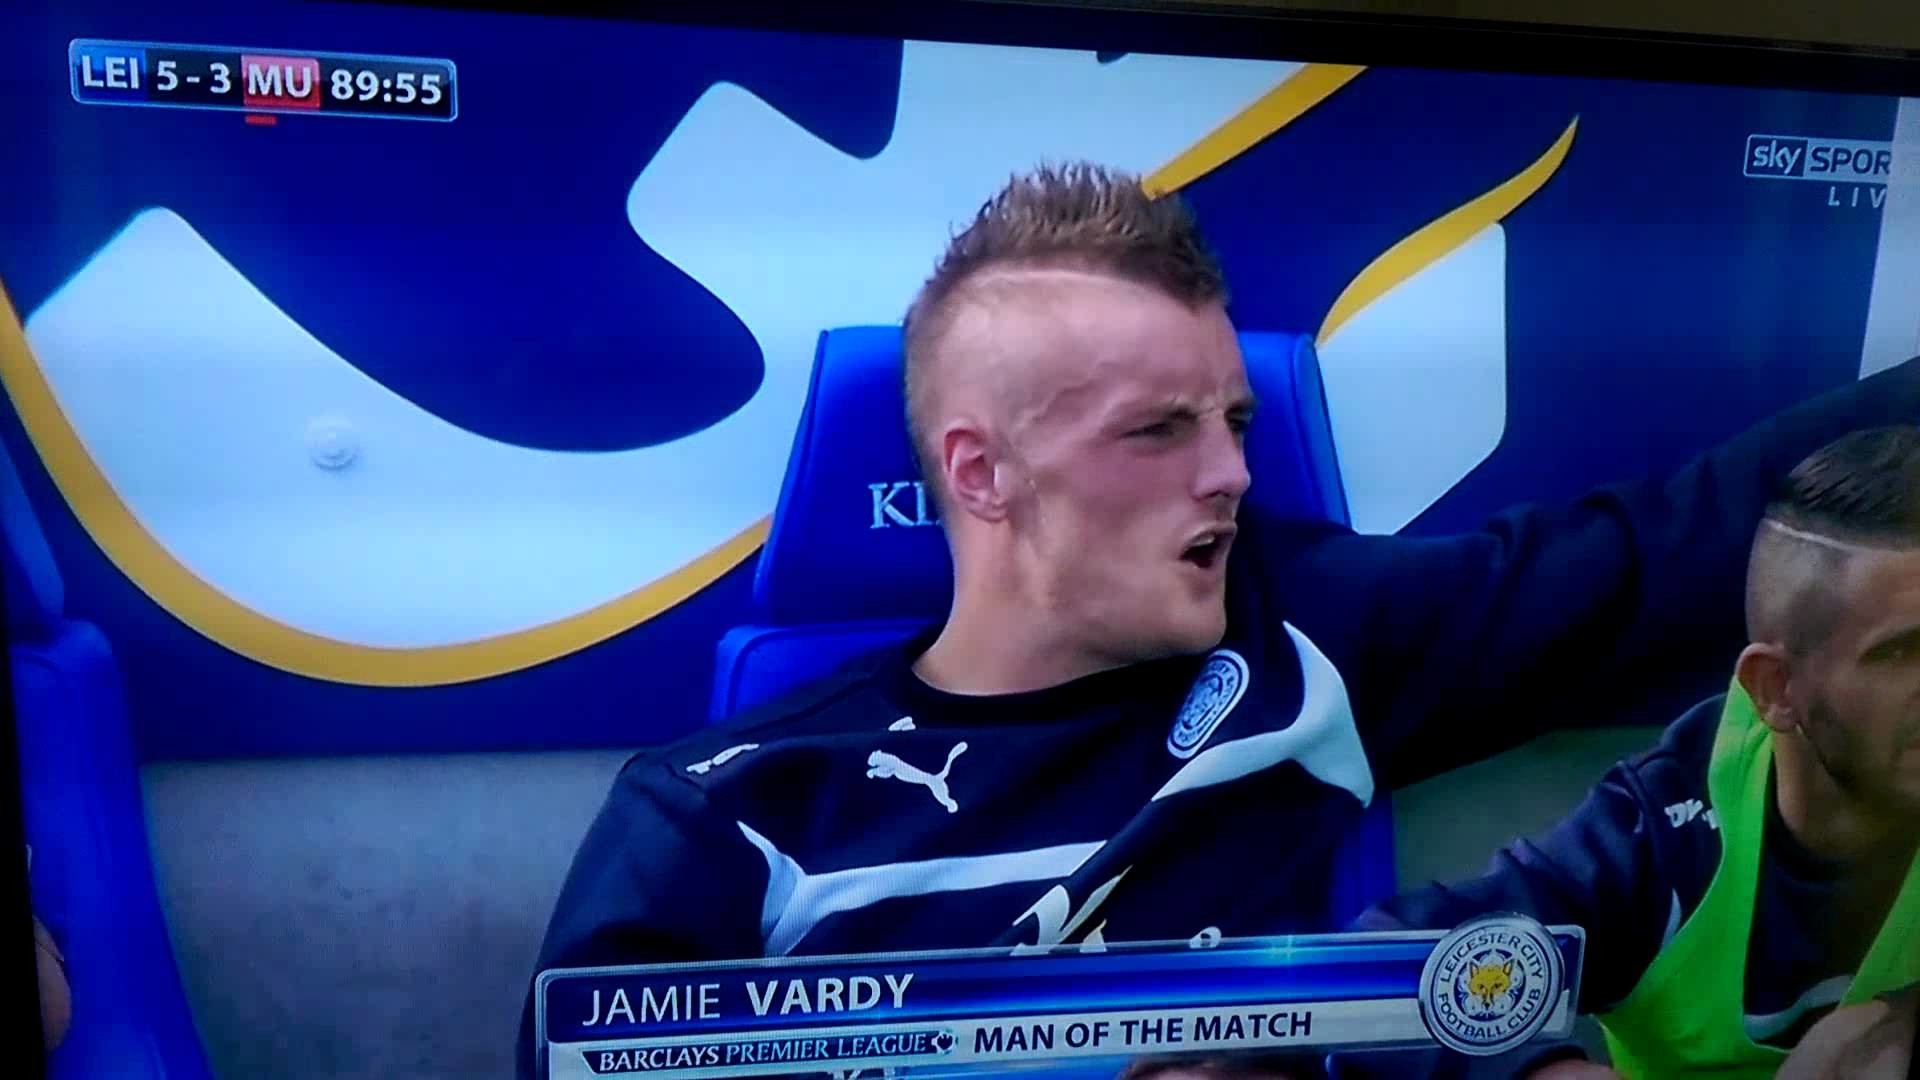 1920x1080 Jamie Vardy not happy about being man of the match